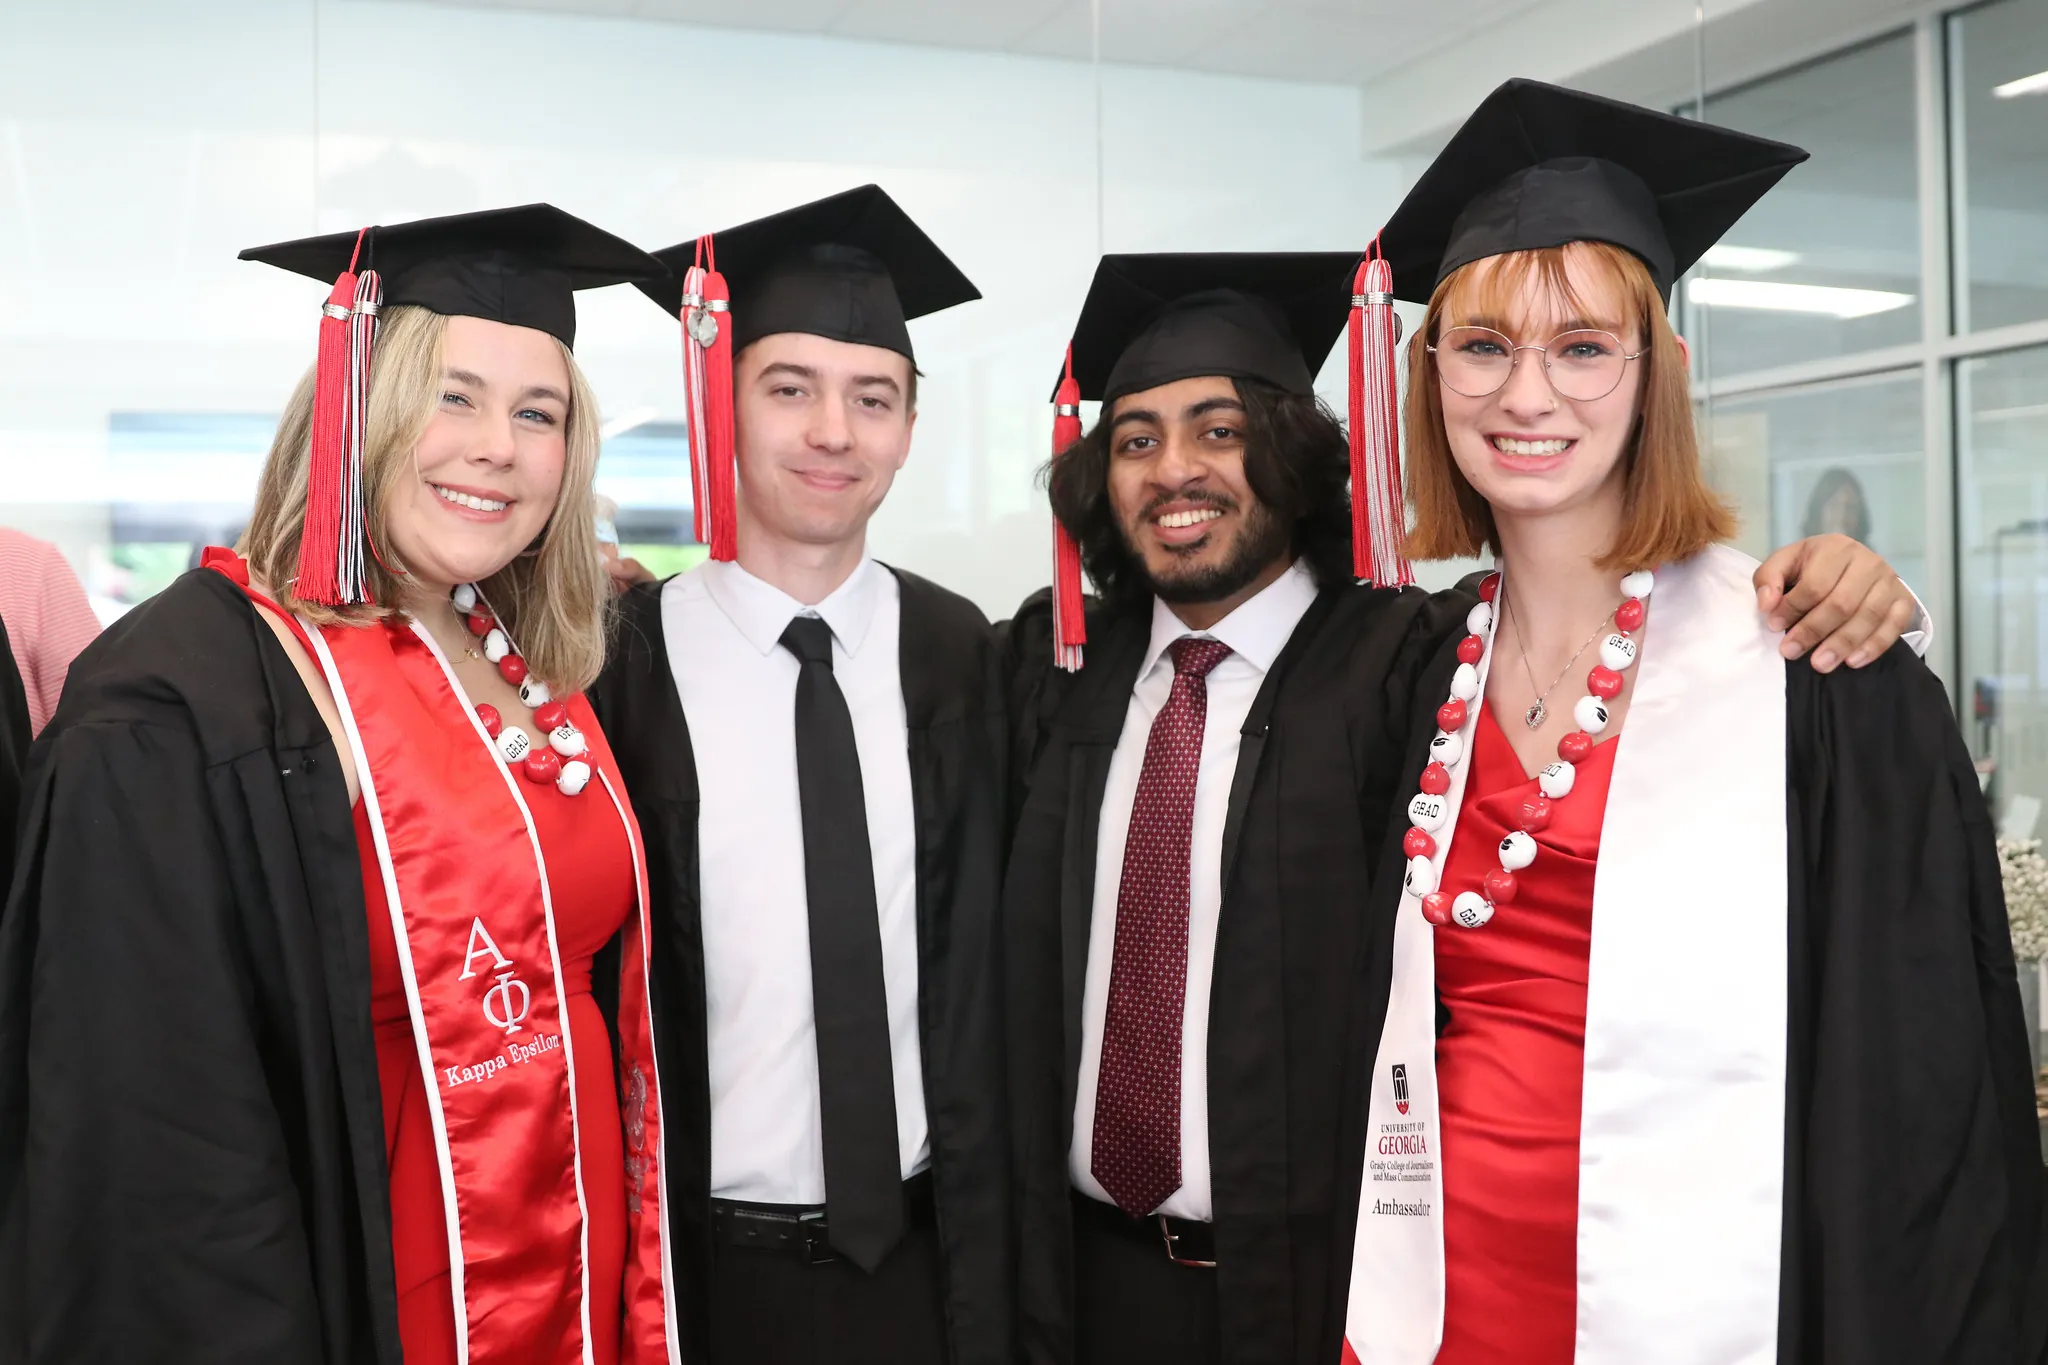 Four Grady College students pose for a photo in the PAF with graduation caps on.